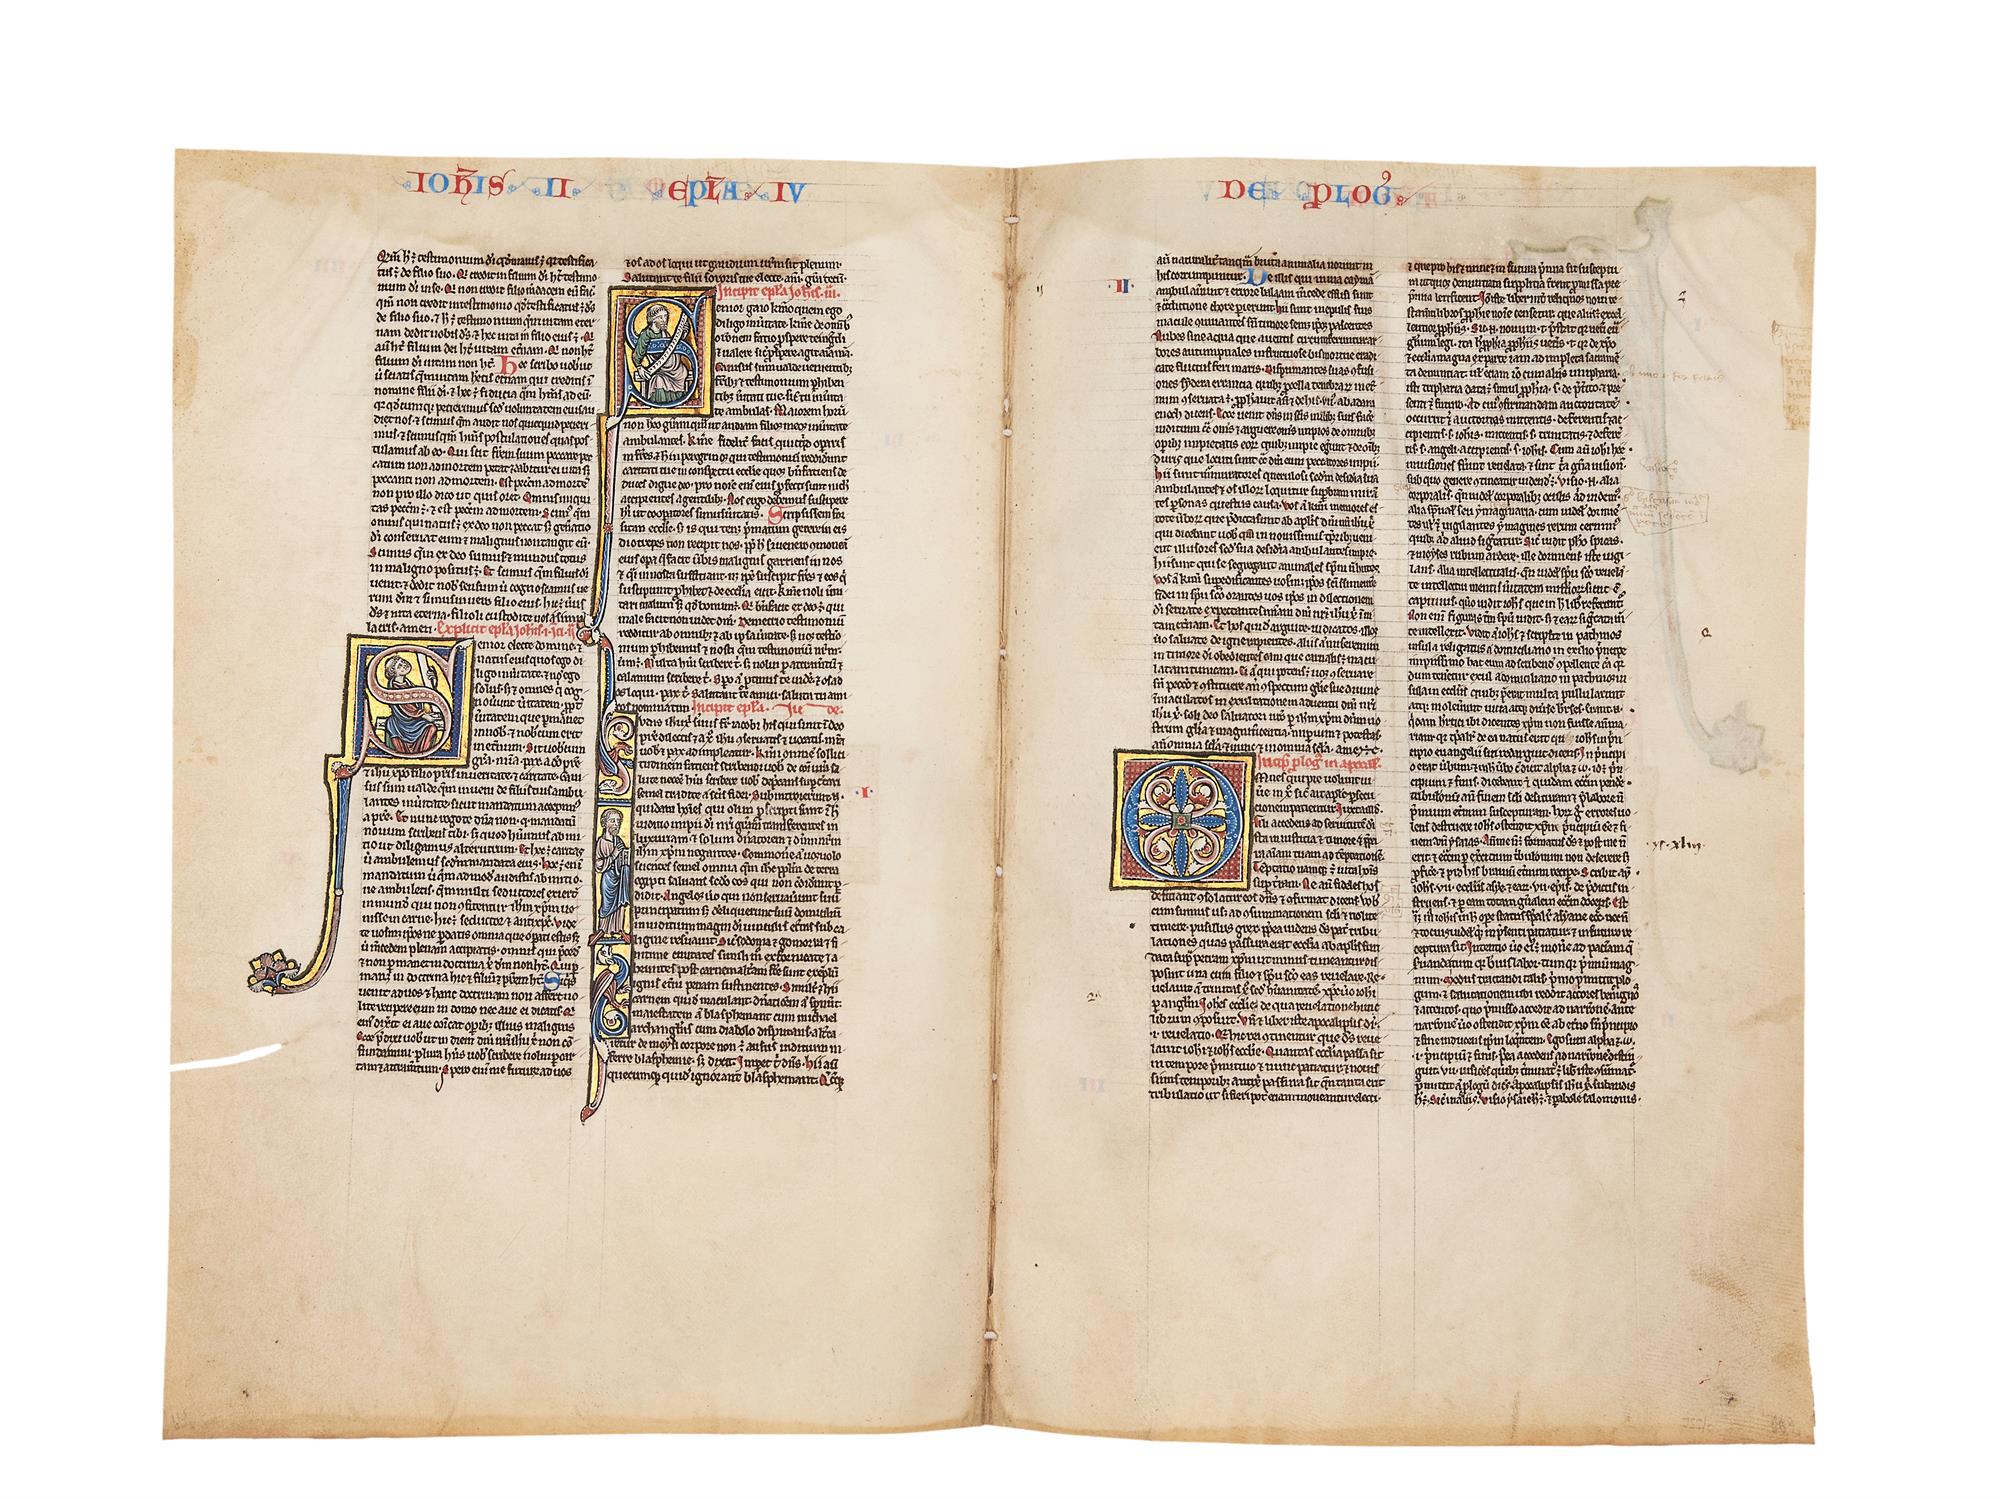 Bifolium with four historiated initials from a lavishly illuminated Bible, in Latin - Image 2 of 2